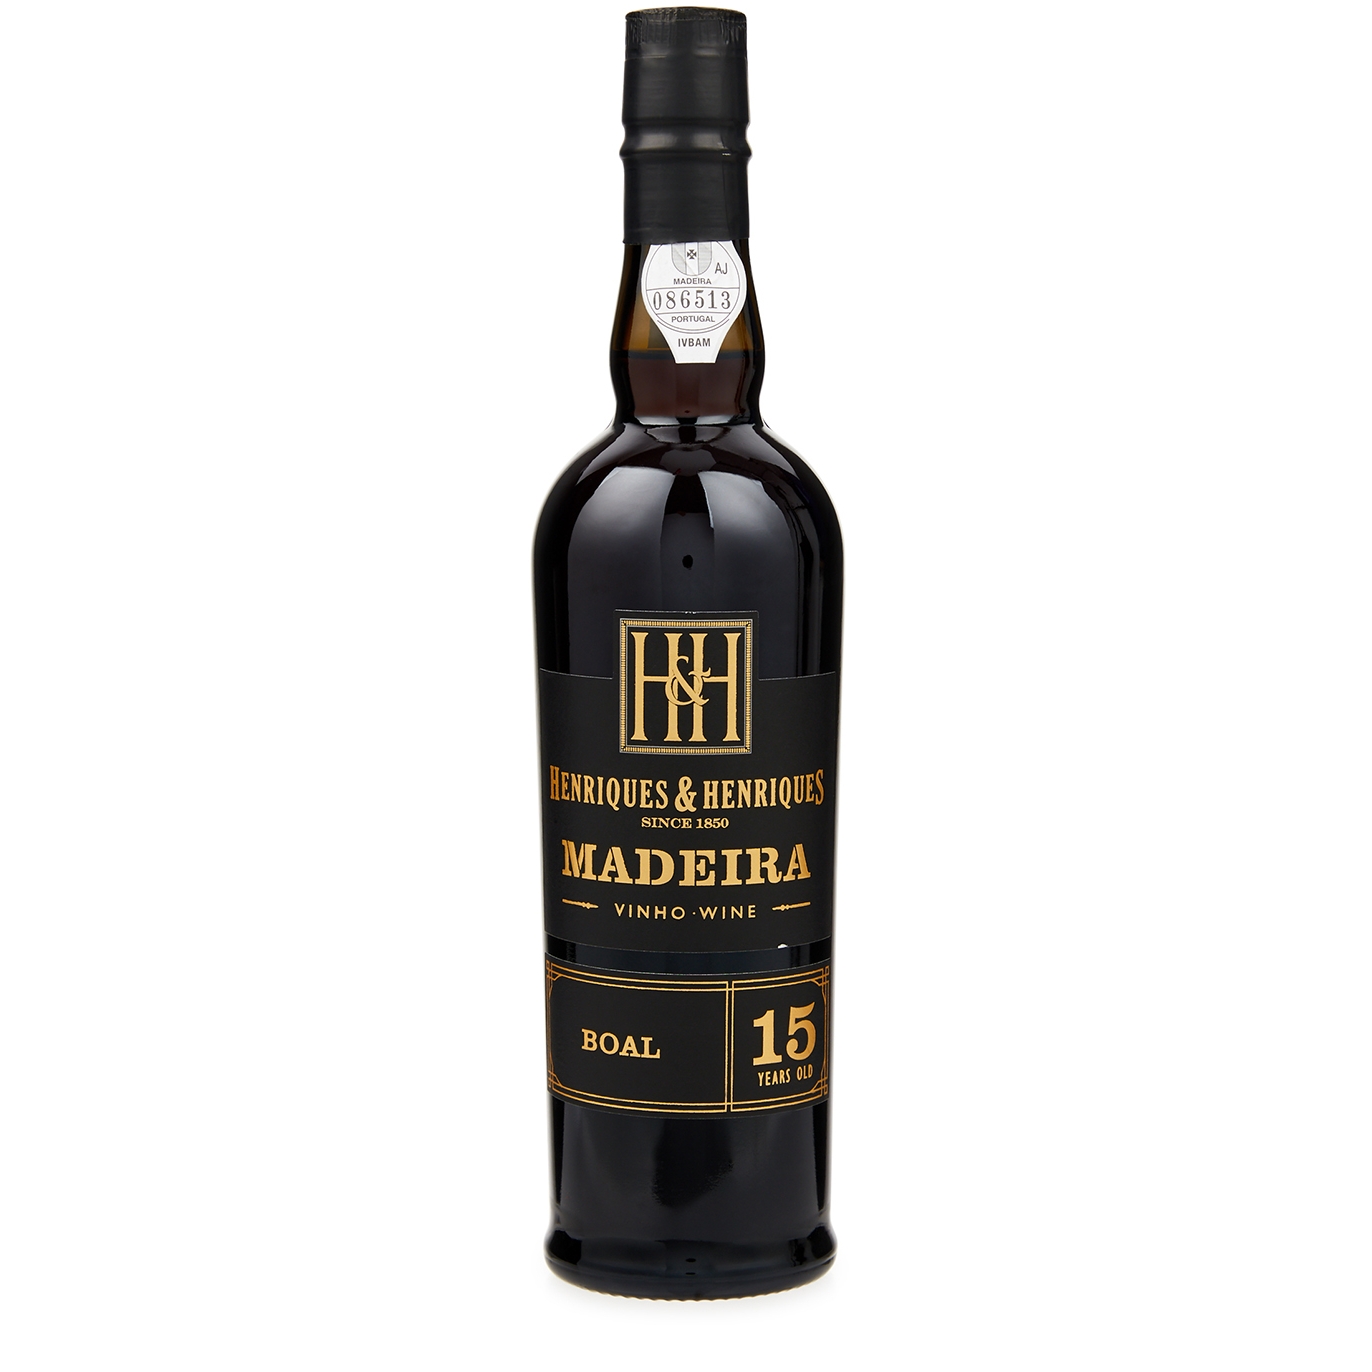 Henriques & Henriques 15 Year Old Boal Madeira 500ml Port And Fortified Wine